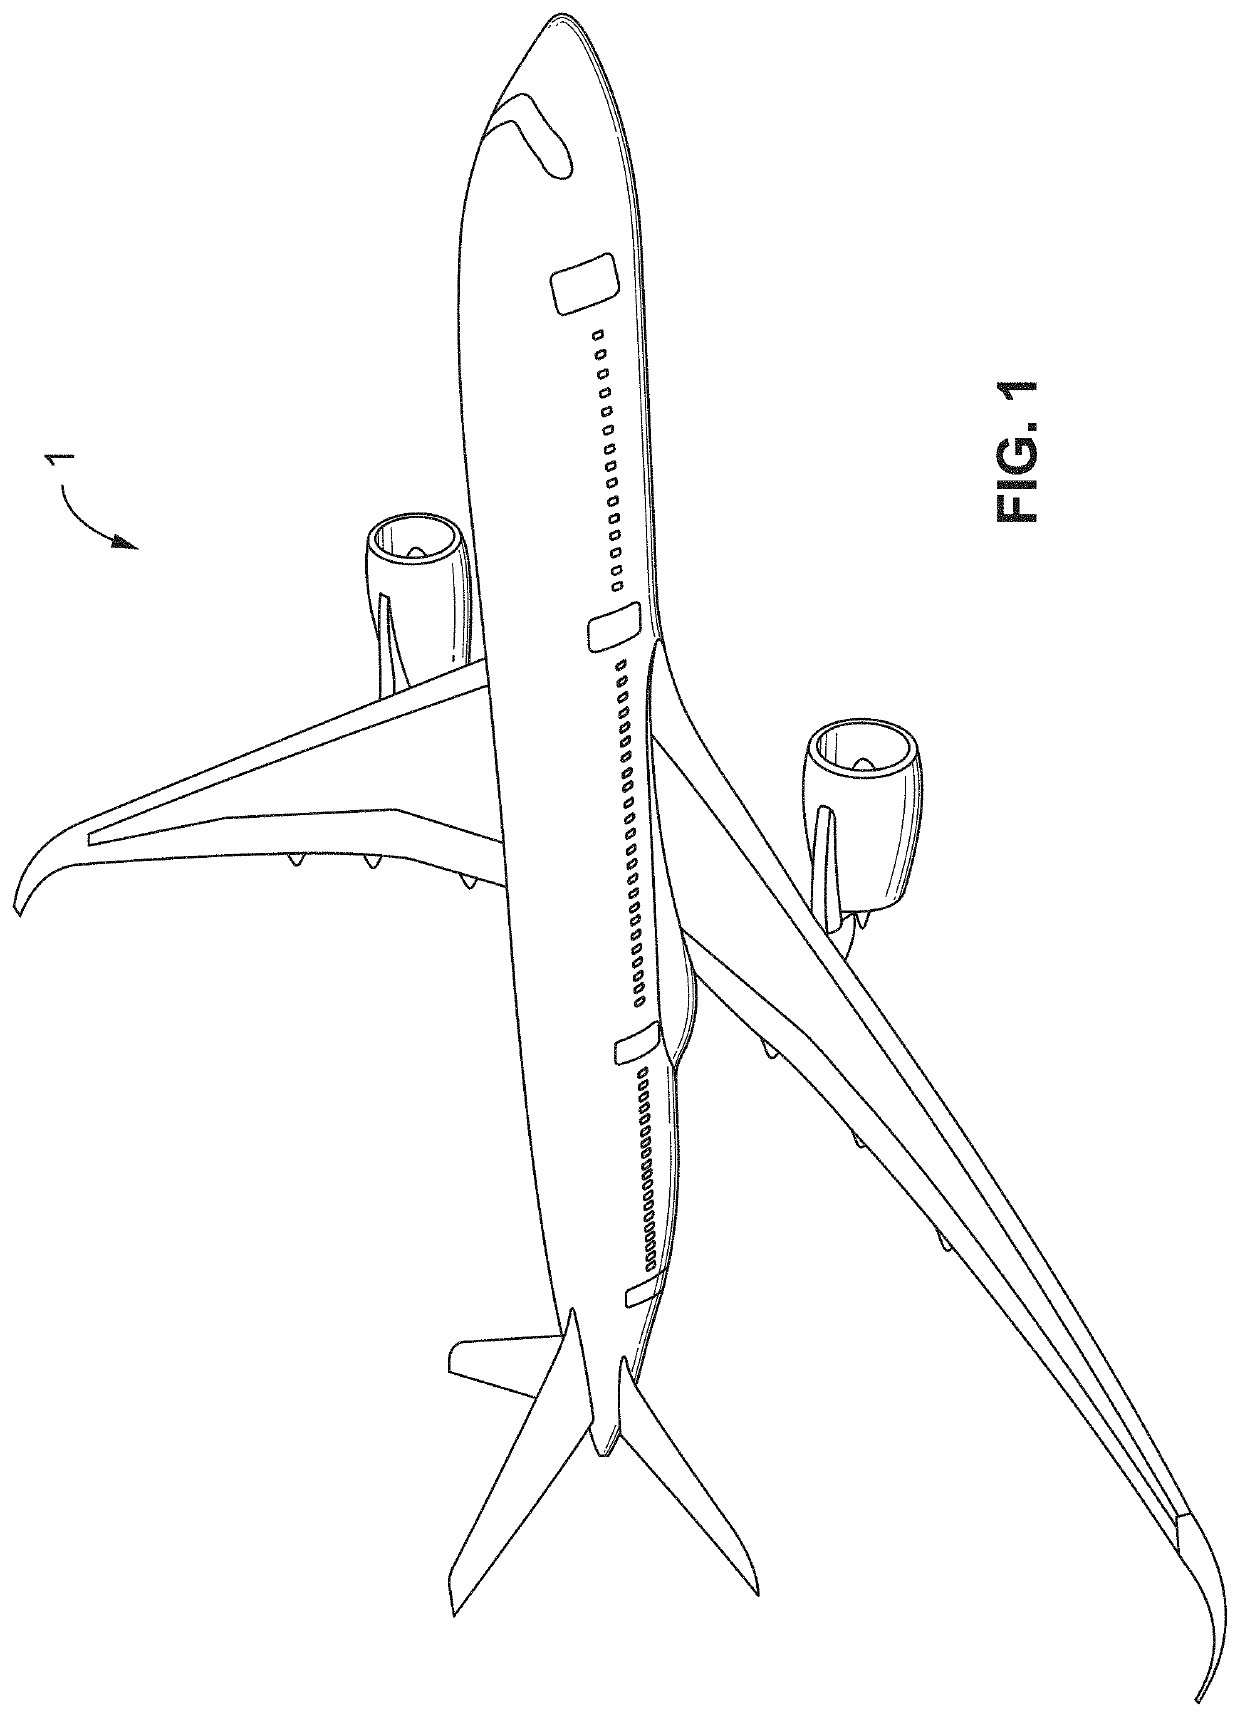 Systems and methods of ultrasonic data evaluation of composite aircraft components